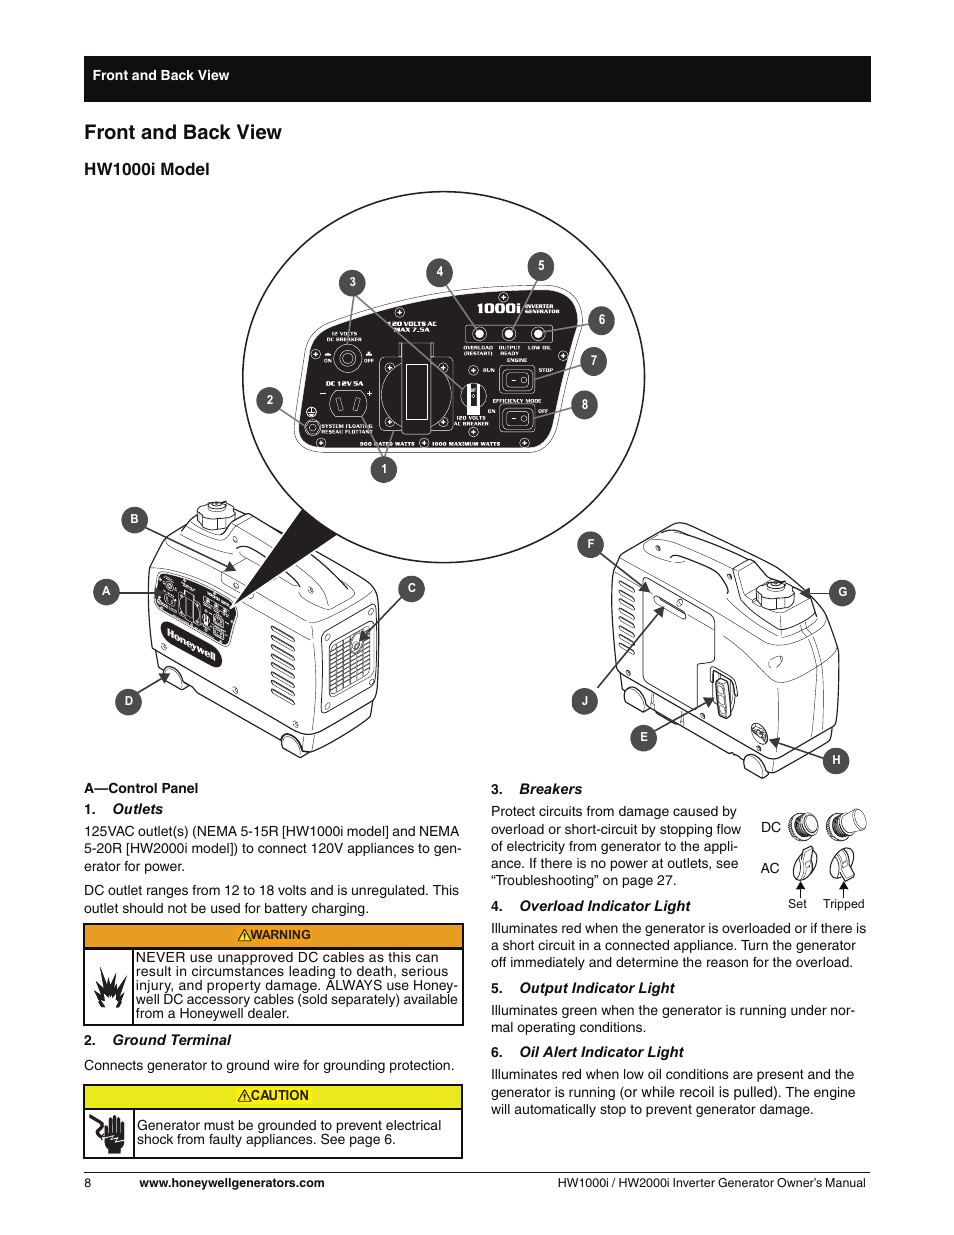 Front and back view, Hw1000i model | Honeywell HW2000i User Manual | Page 14 / 46